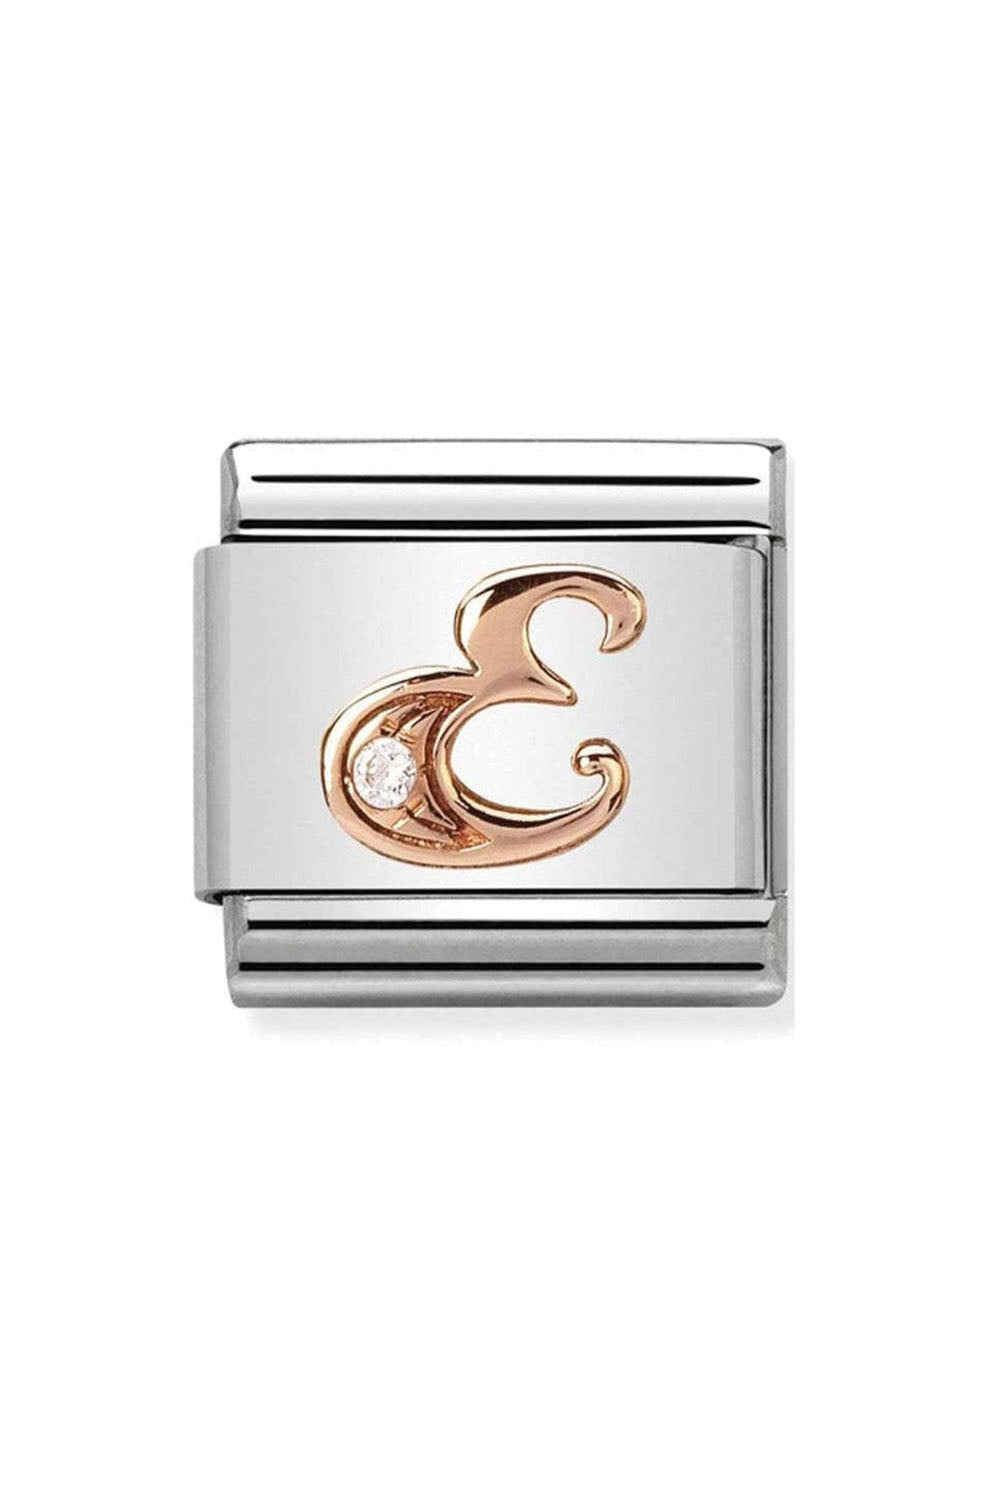 LETTERS 9k rose gold and CZ E